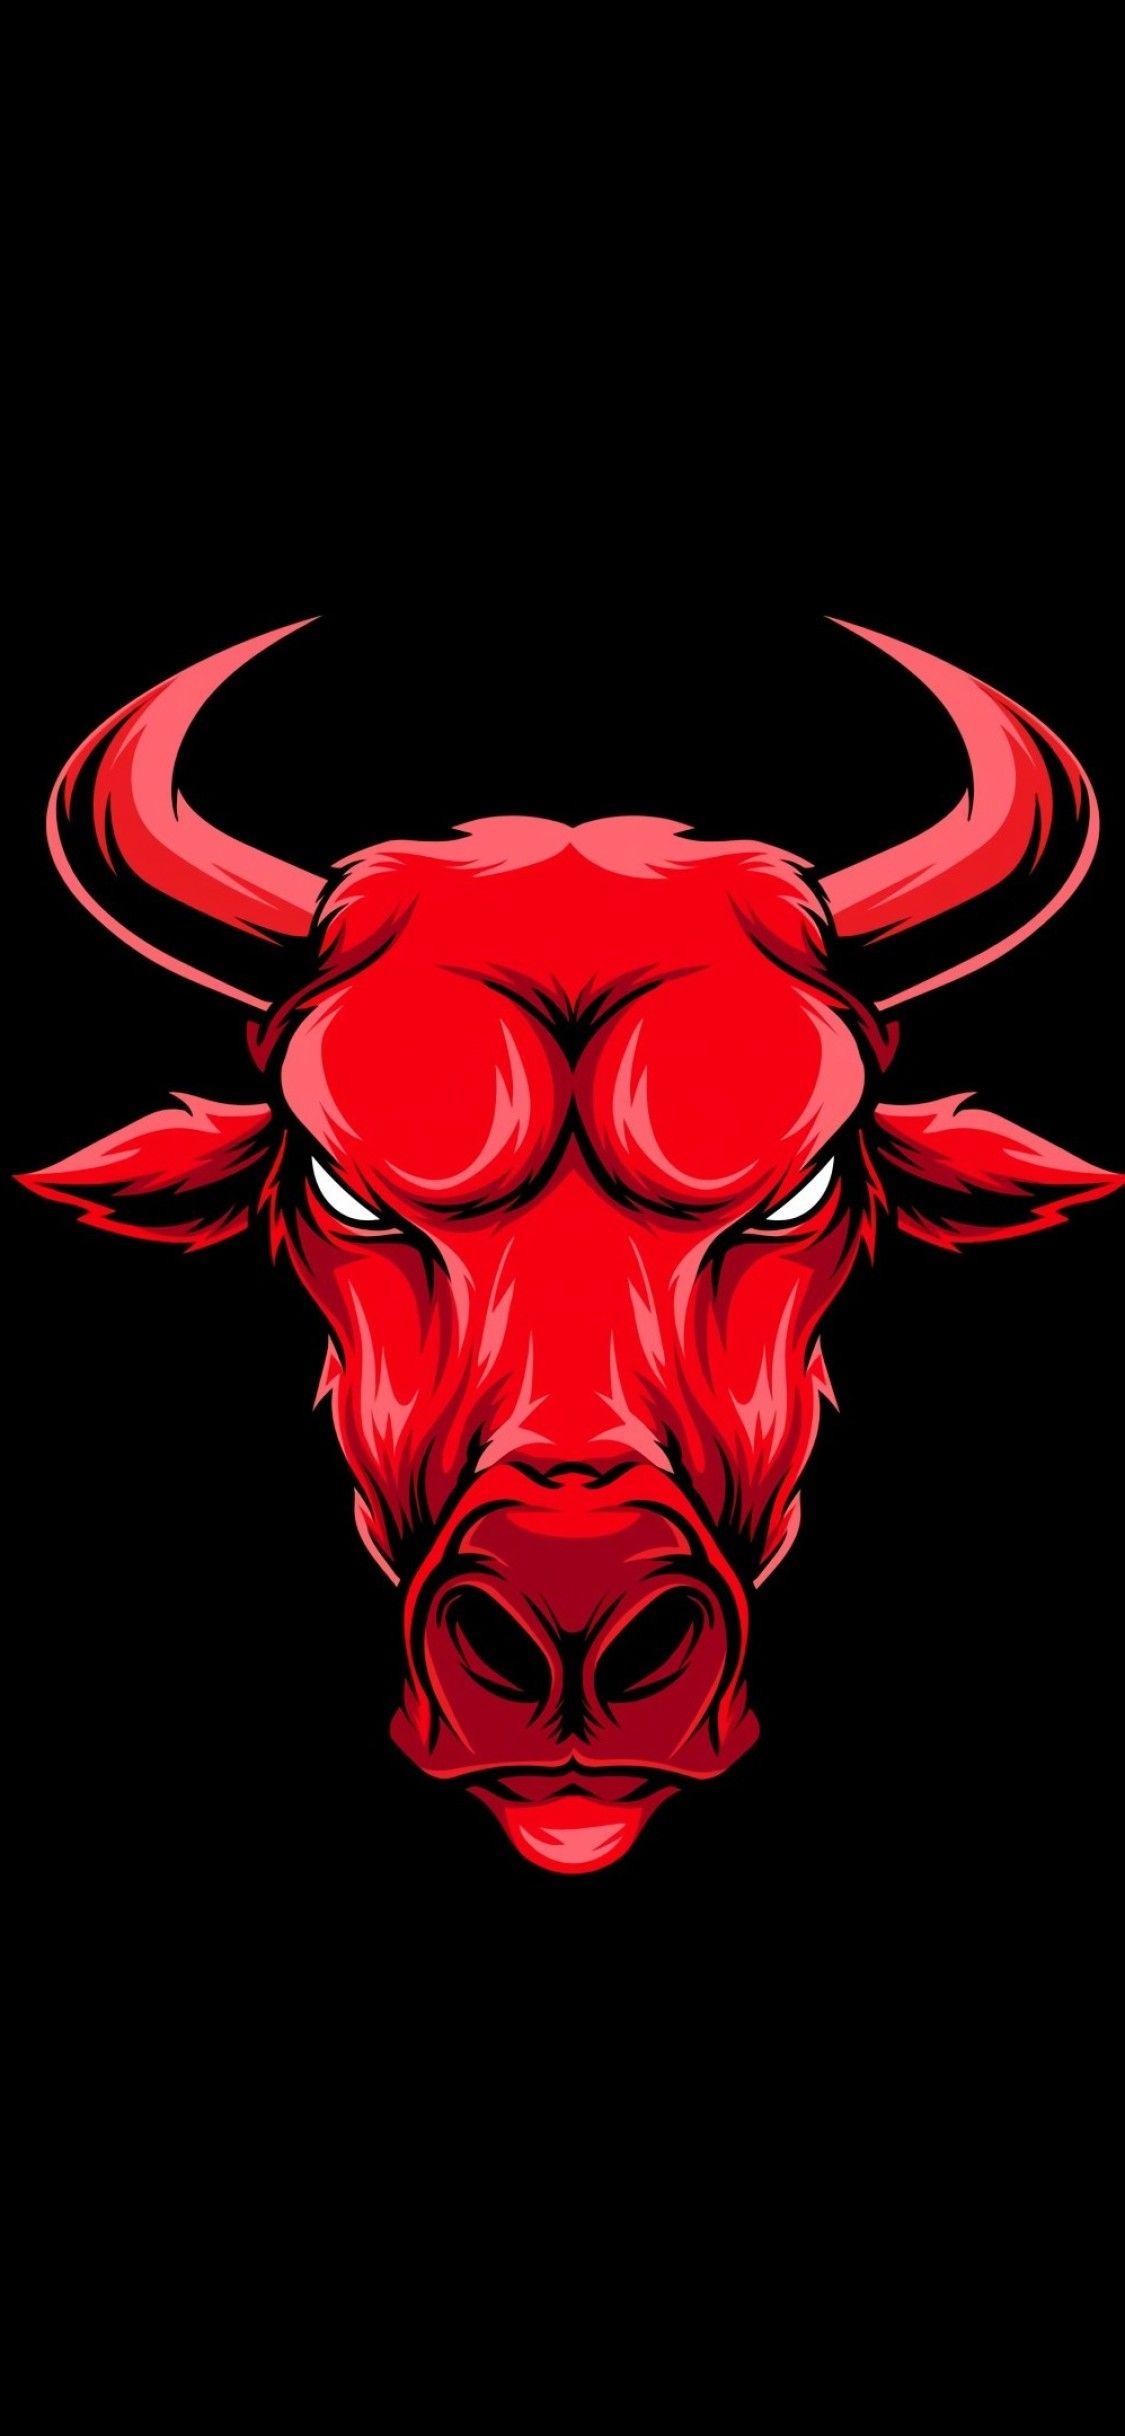 Angry Bull Wallpapers - Top Free Angry Bull Backgrounds - WallpaperAccess